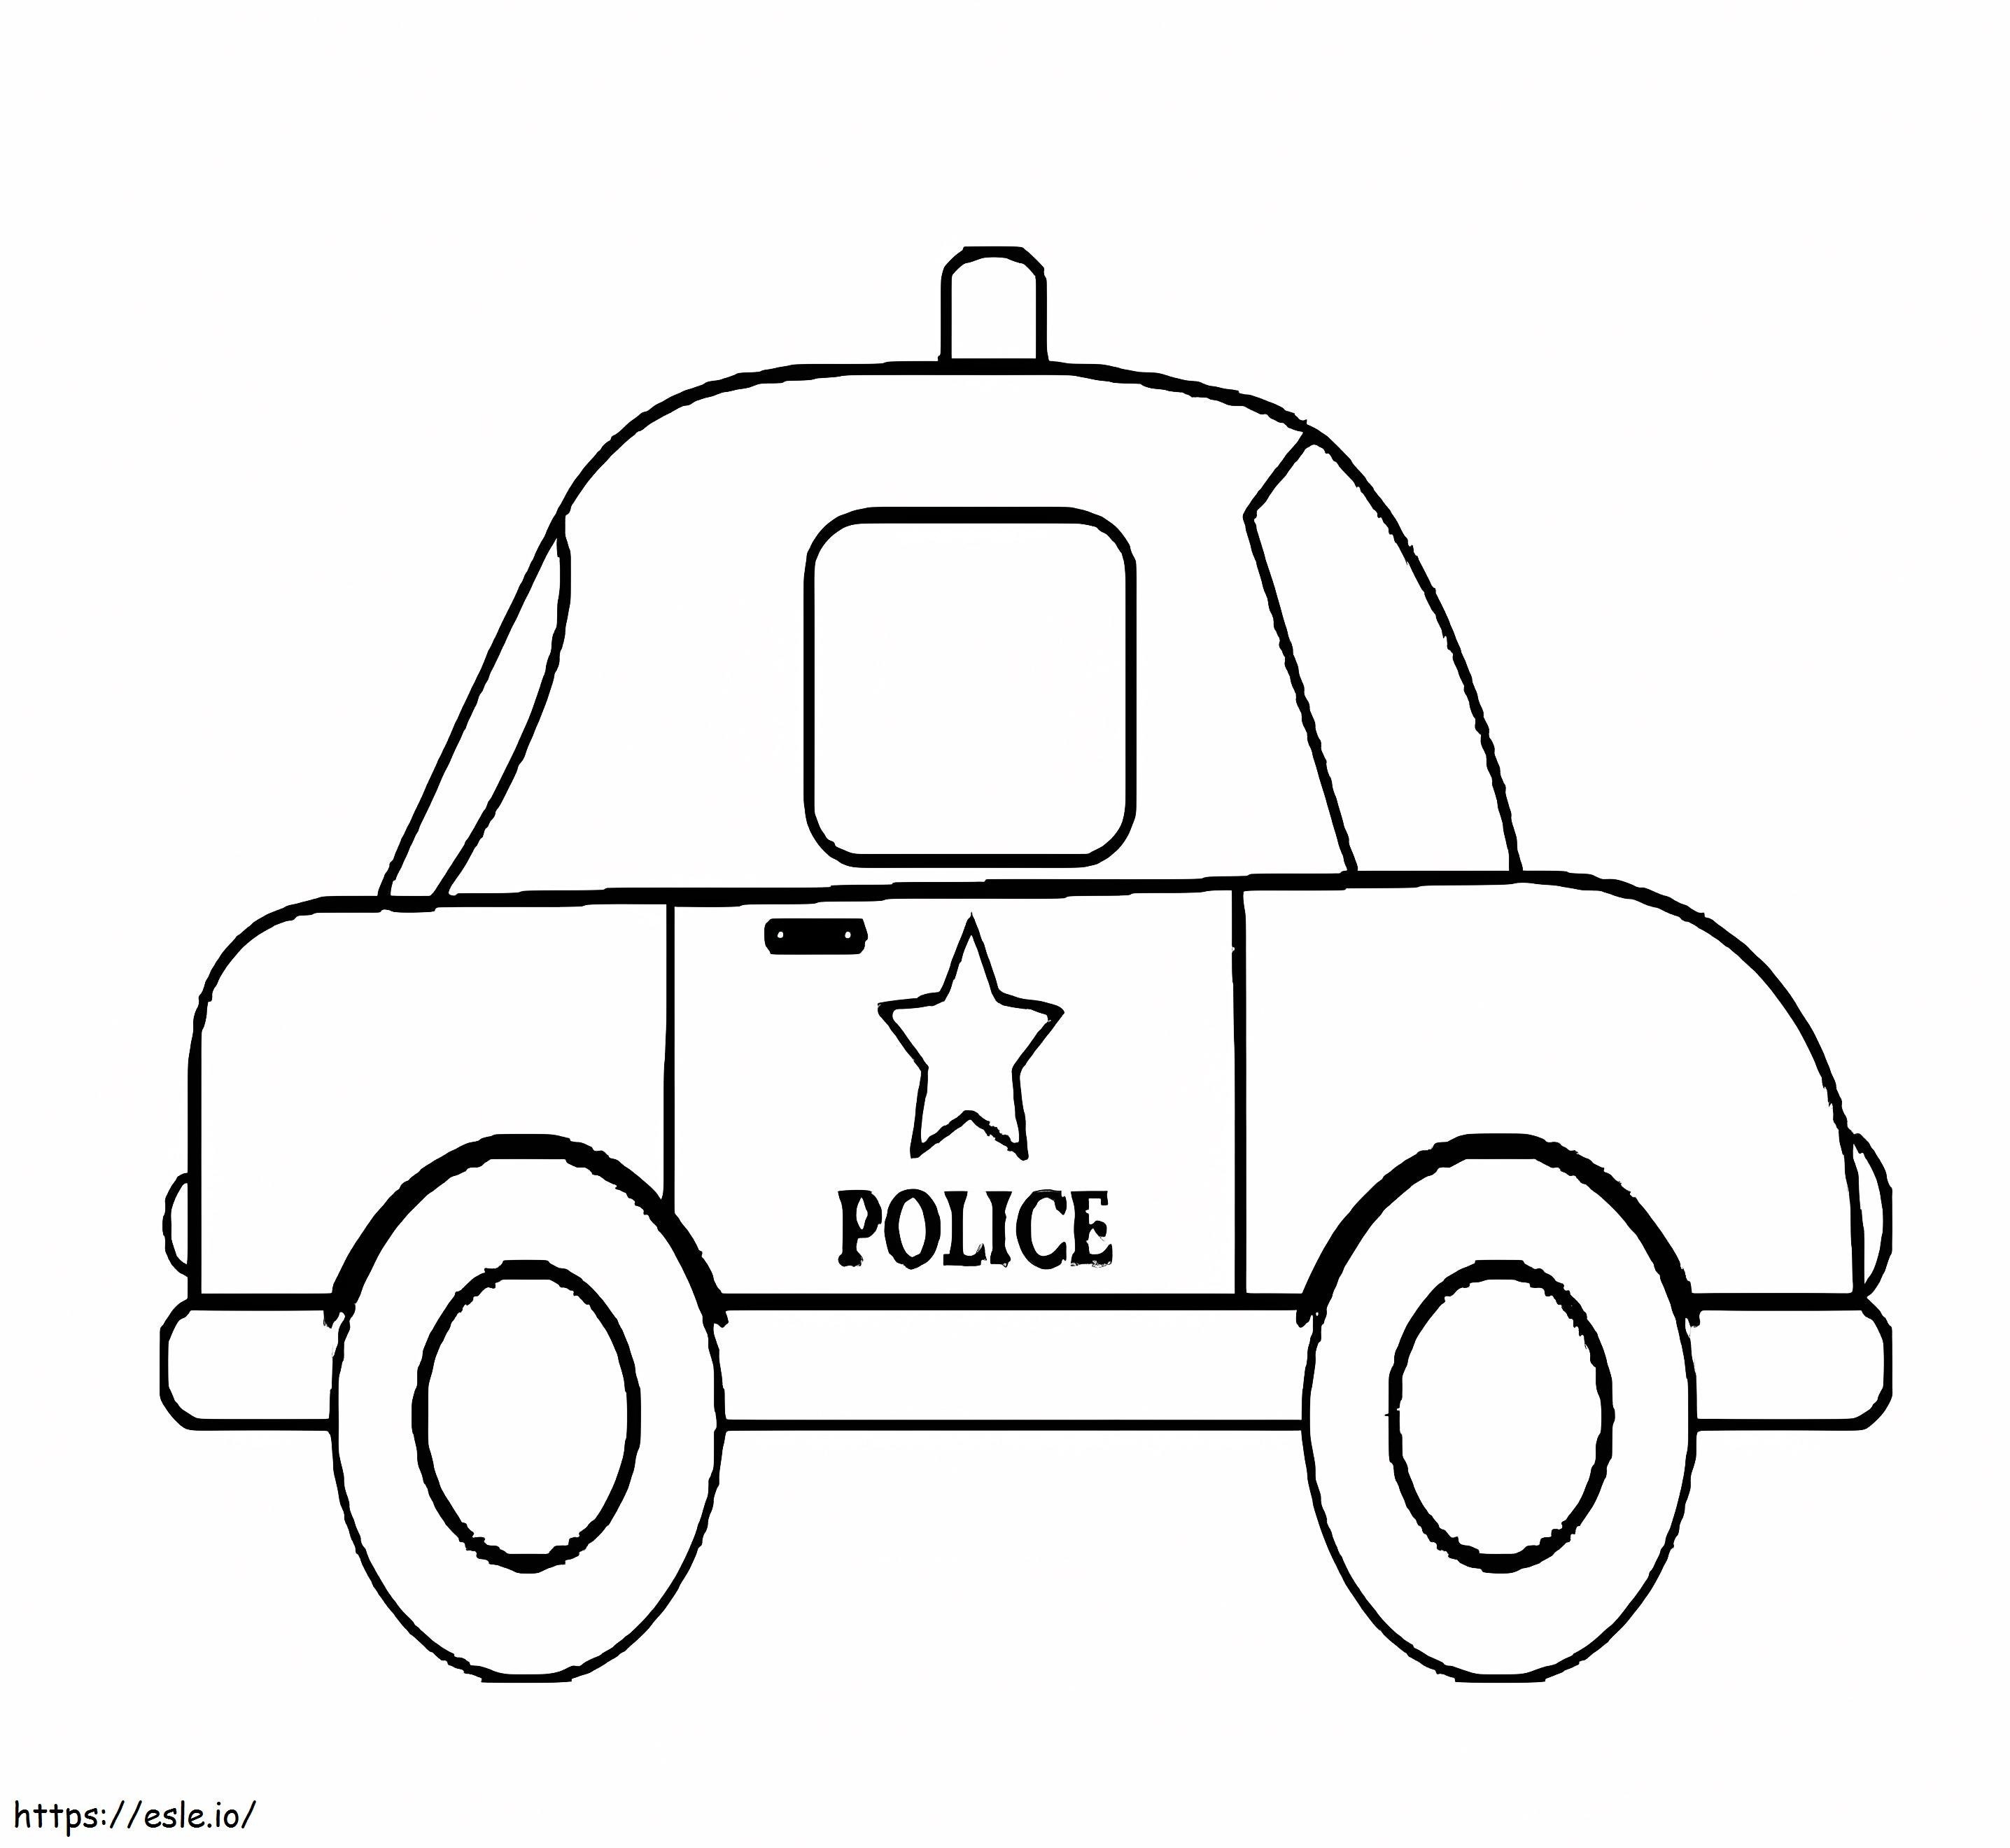 Easy Police Car coloring page